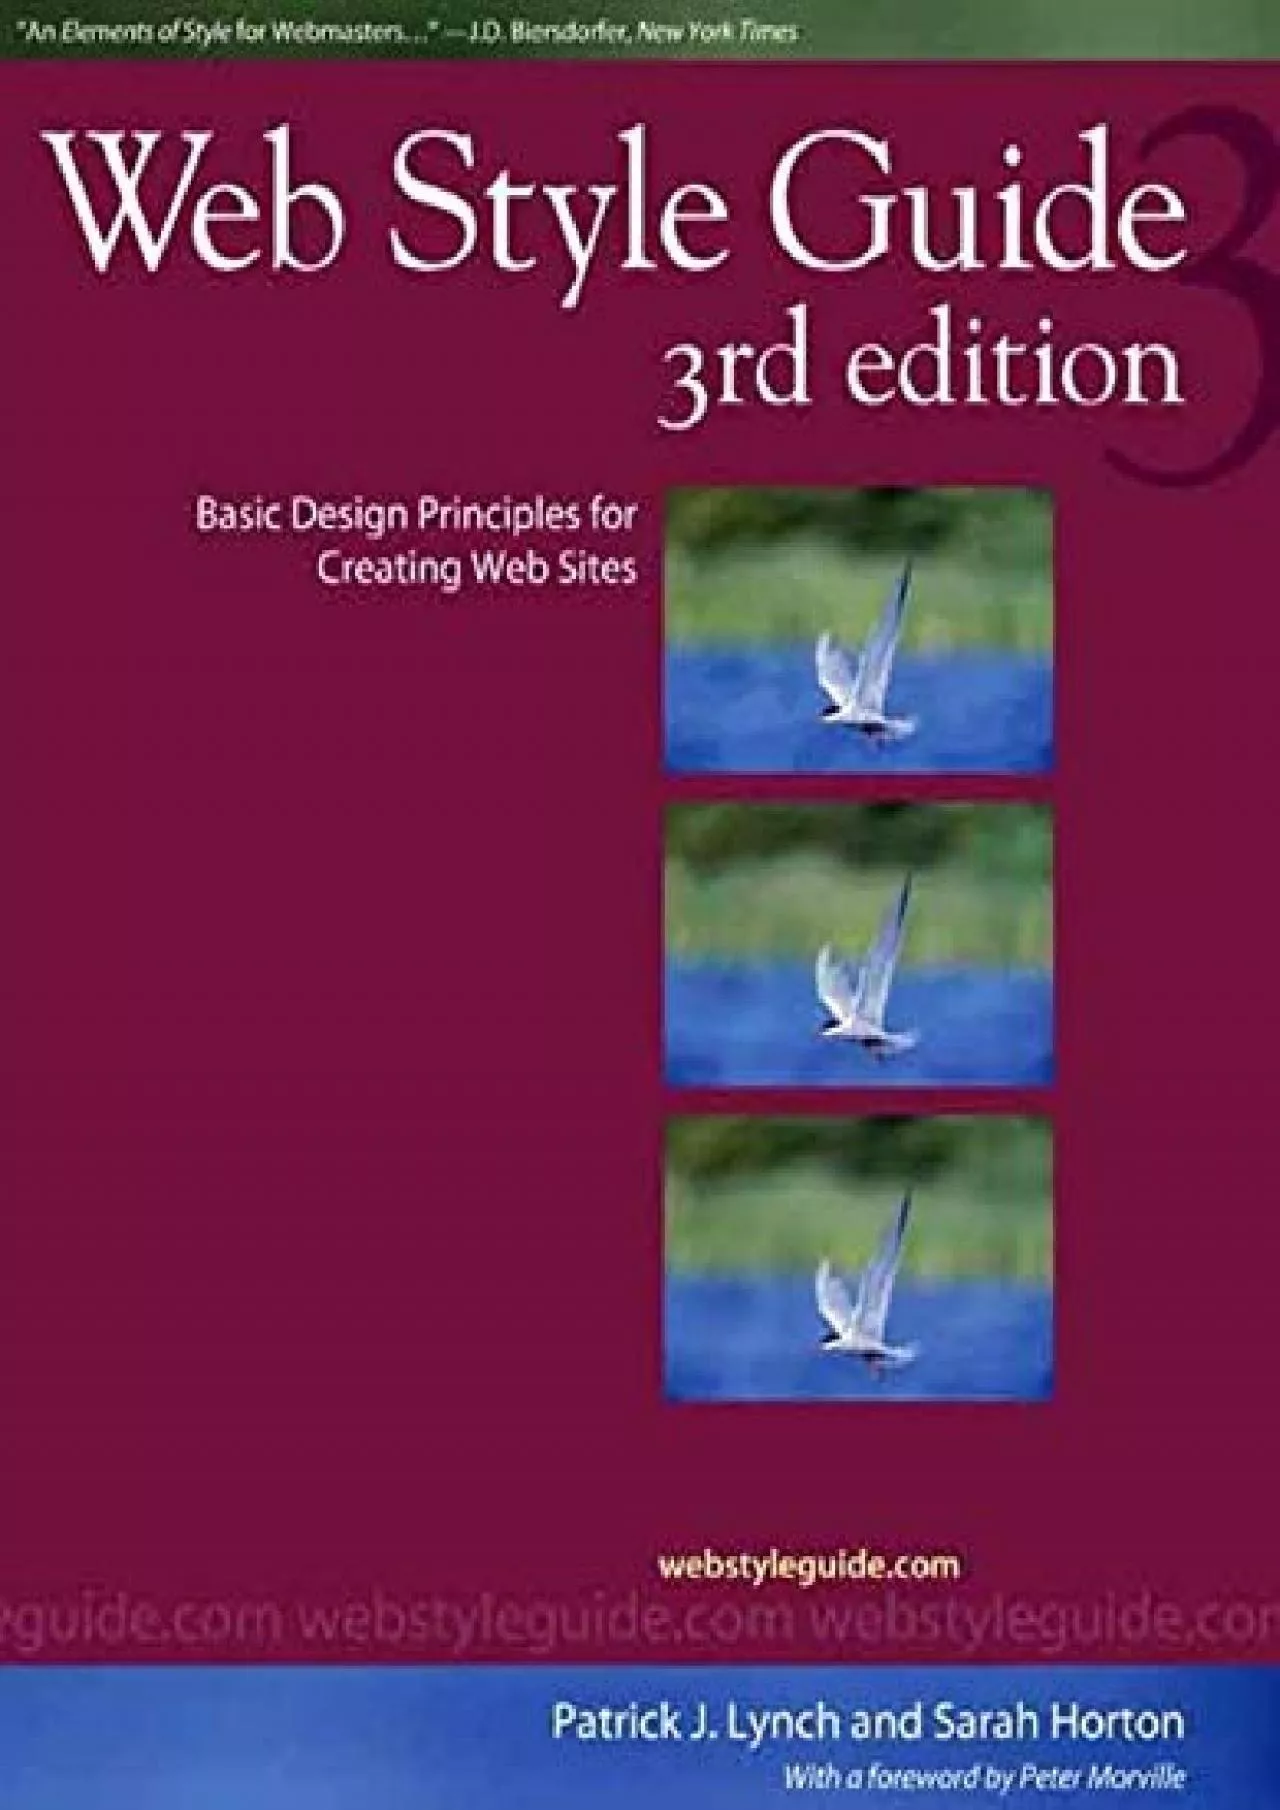 (EBOOK)-Web Style Guide: Basic Design Principles for Creating Web Sites